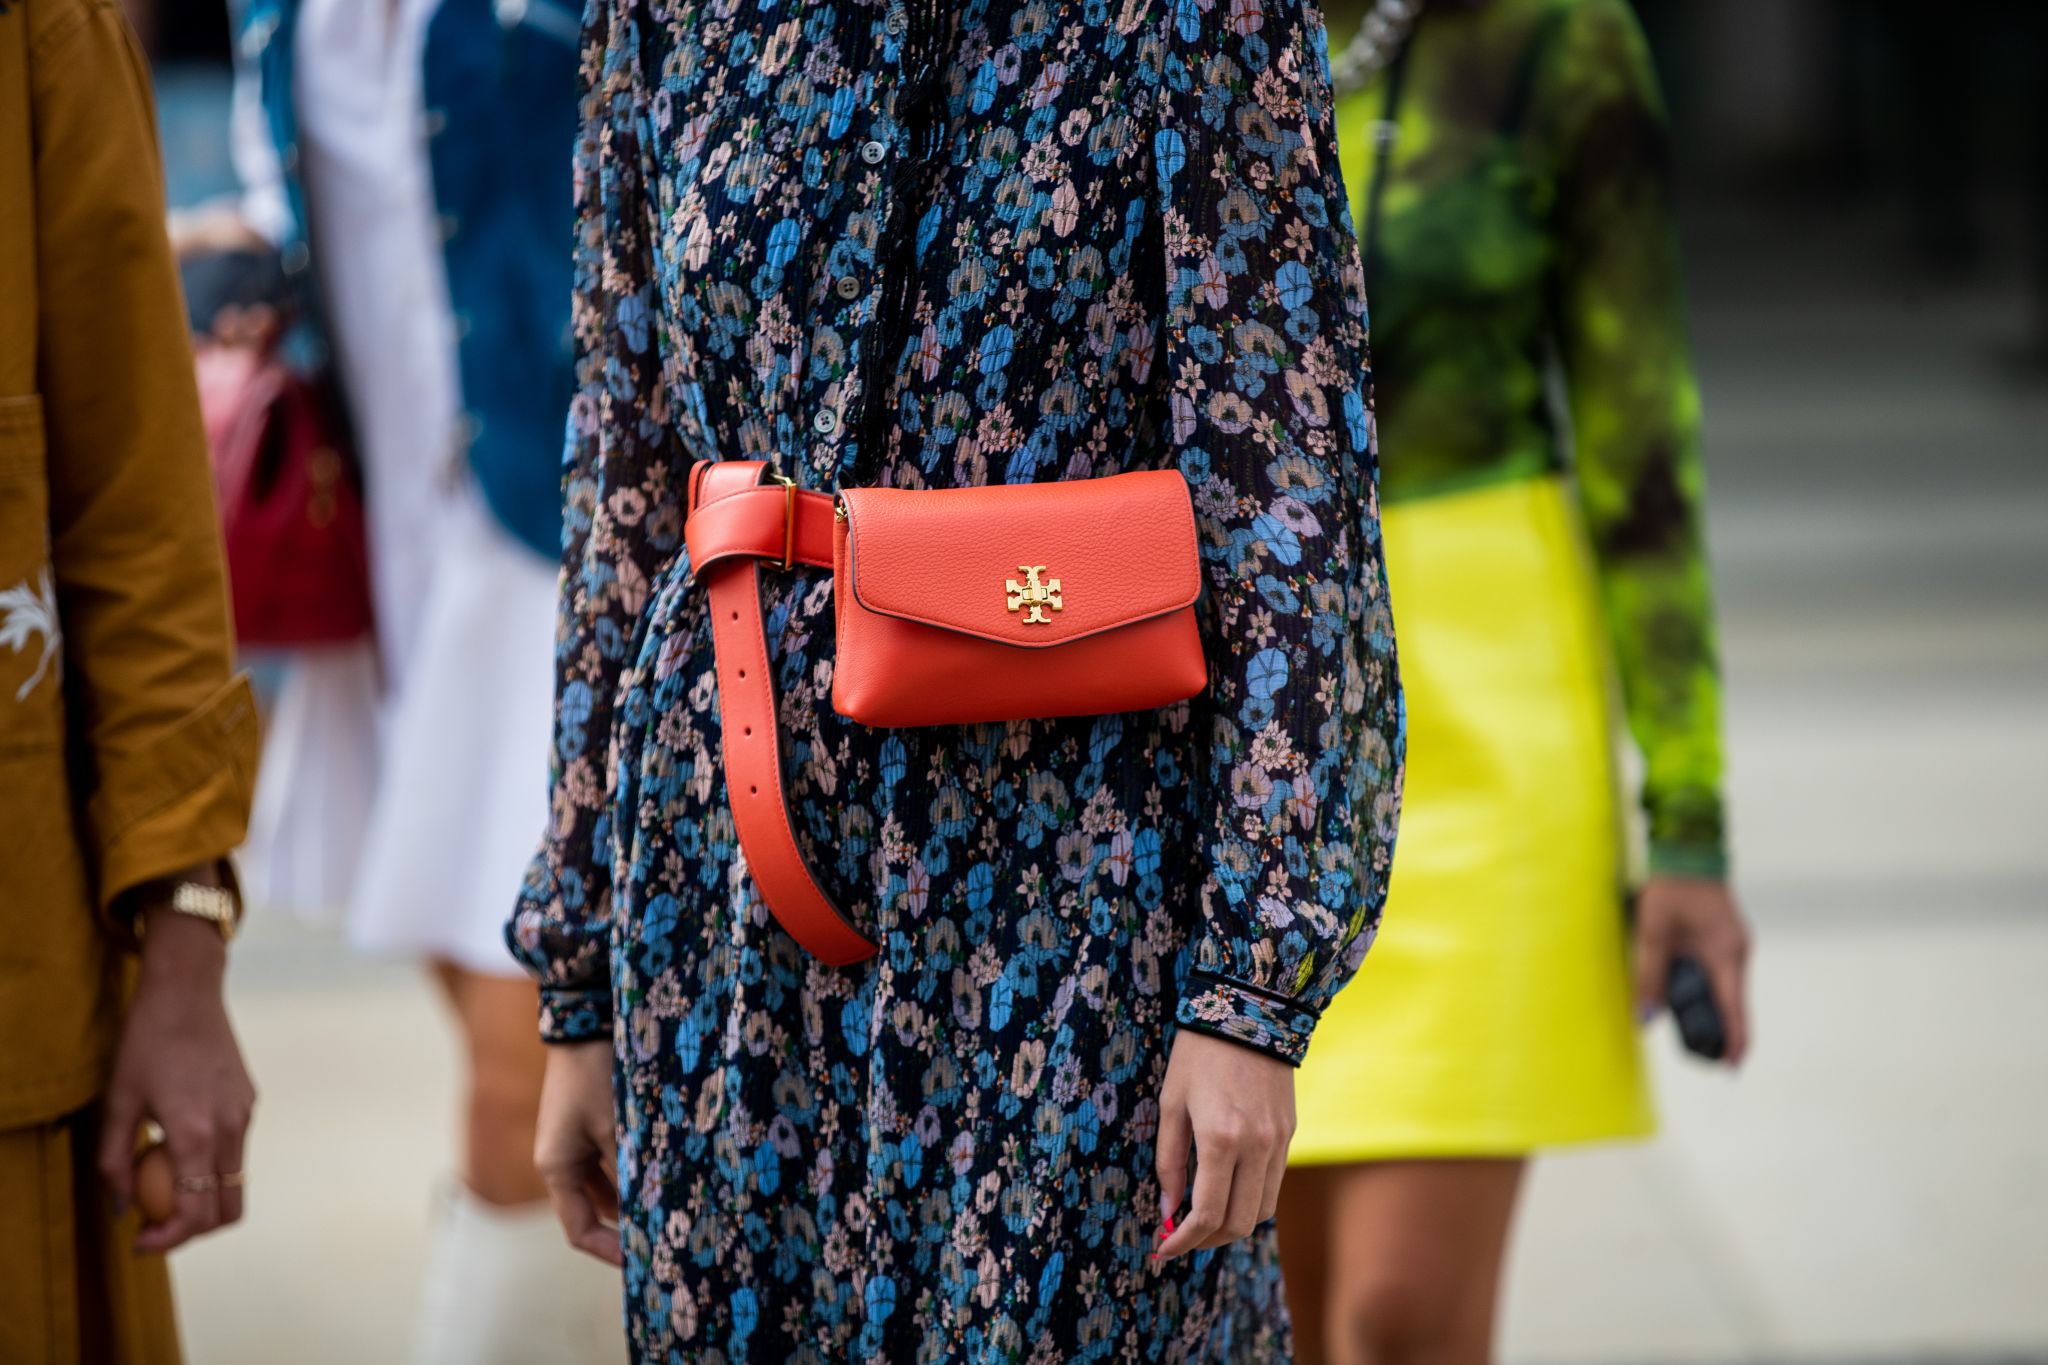 Here's a look at what to buy at the Tory Burch Semi-Annual Sale